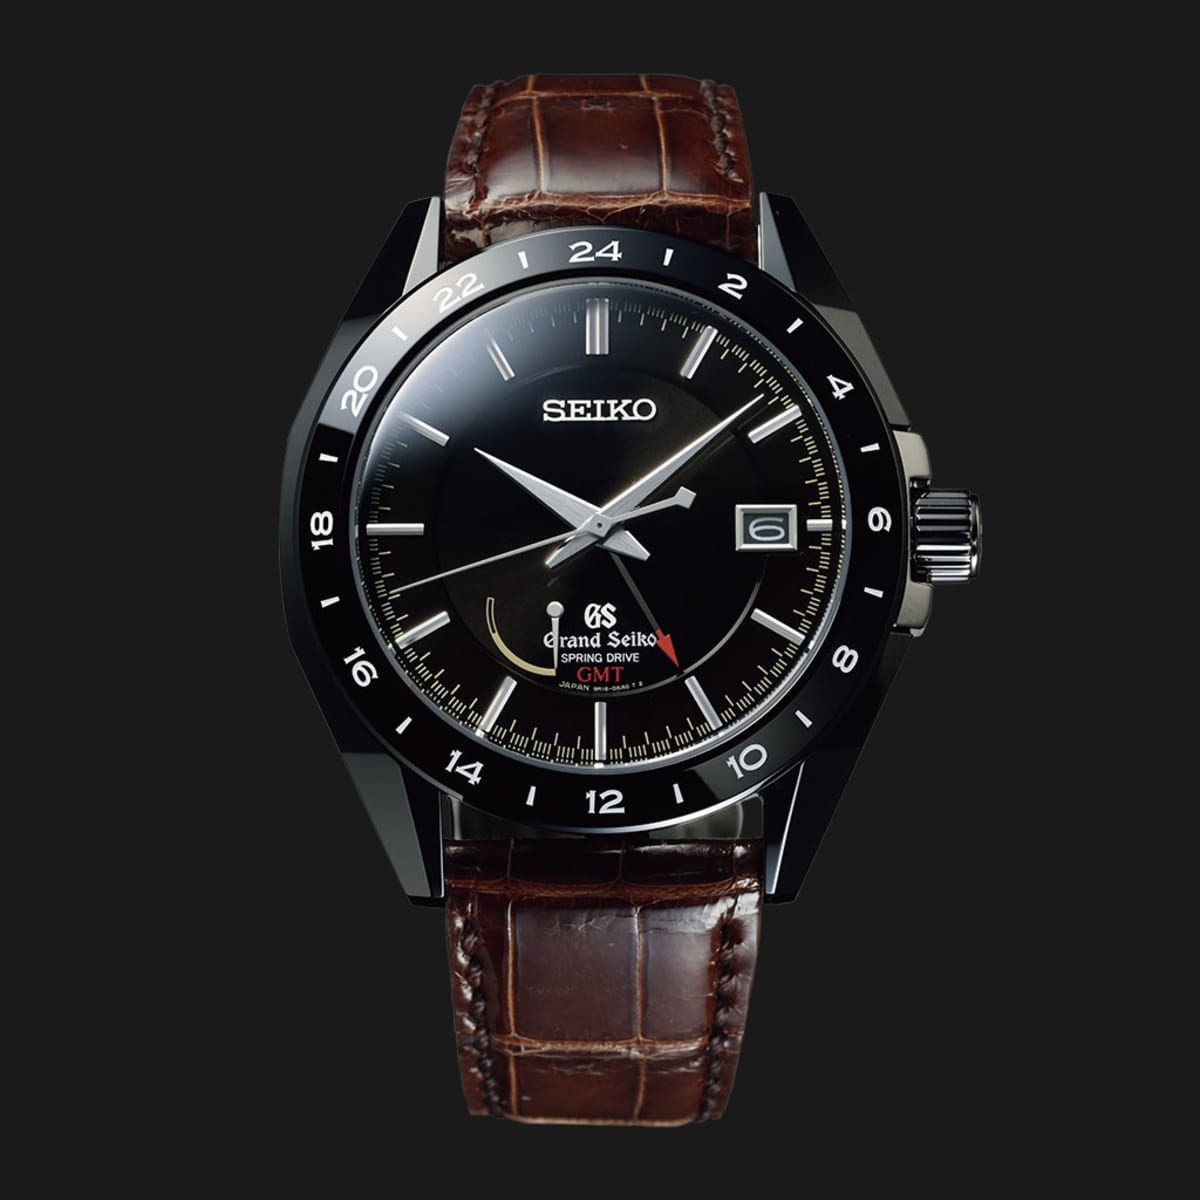 Grand Seiko introduces its first black ceramic timepieces - Acquire